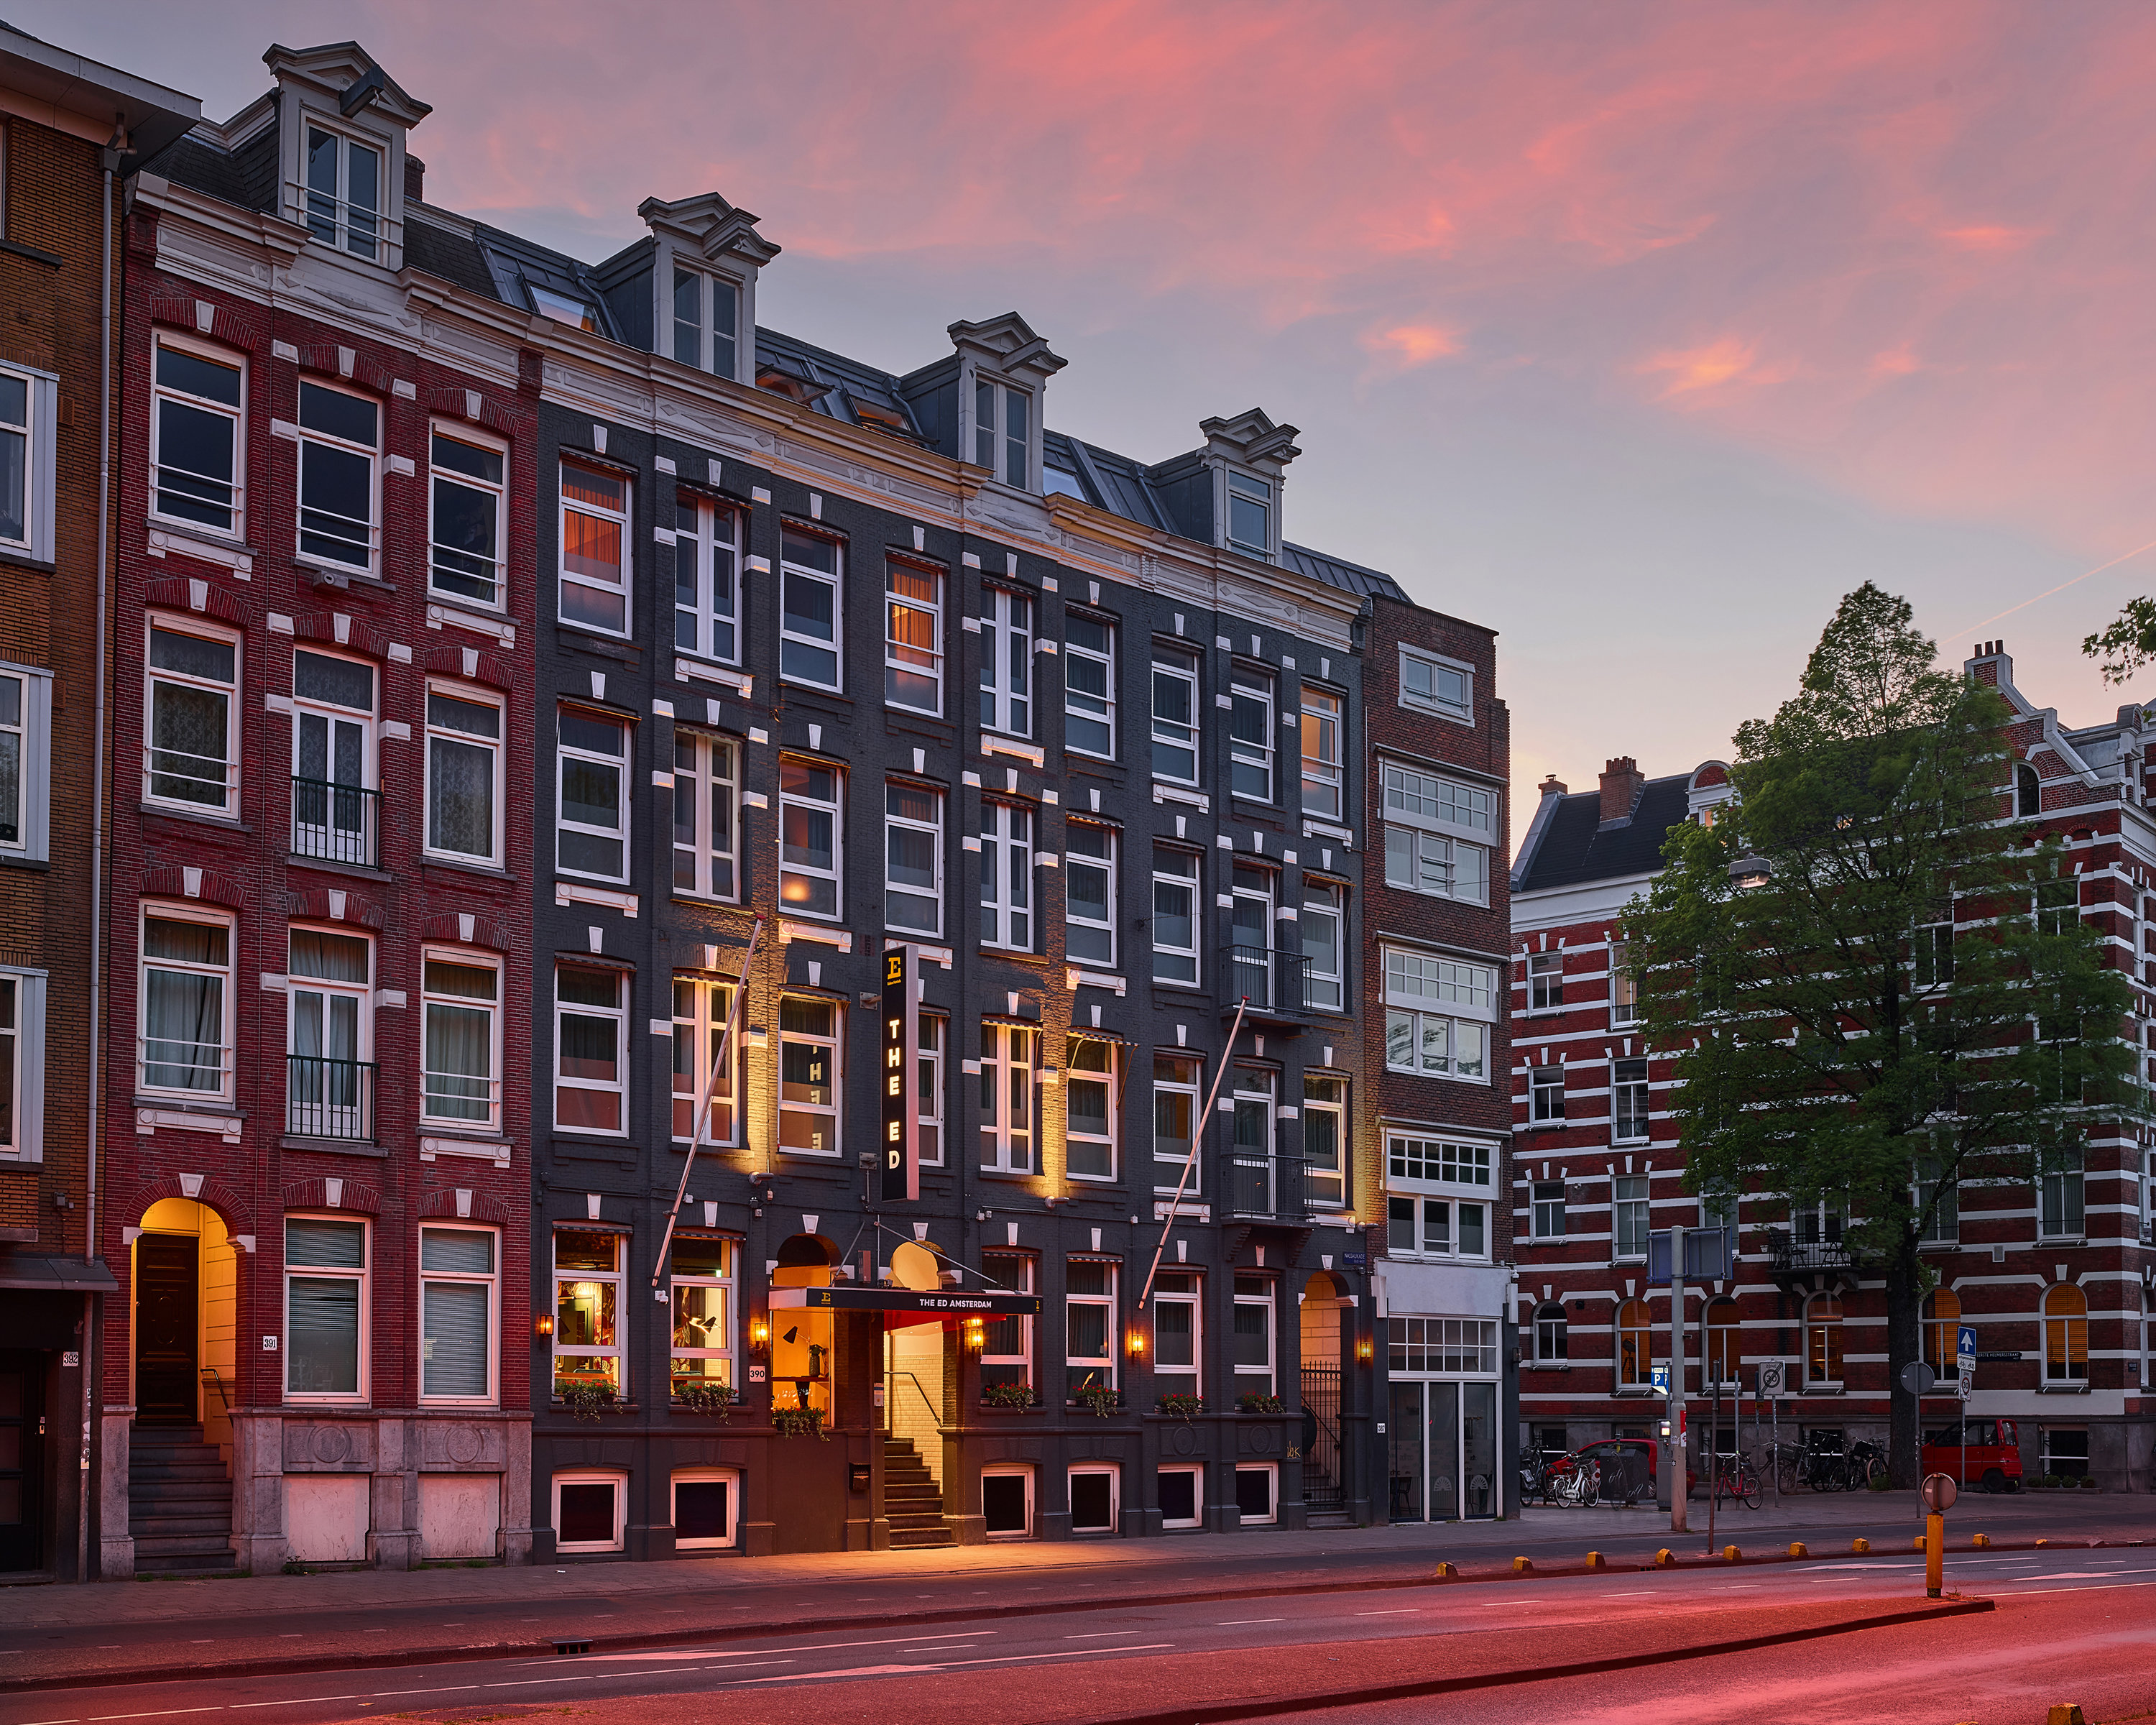 The ED Amsterdam <br/>80.00 ew <br/> <a href='http://vakantieoplossing.nl/outpage/?id=6b820d0a3c55eee2efb4649d7bb7951b' target='_blank'>View Details</a>